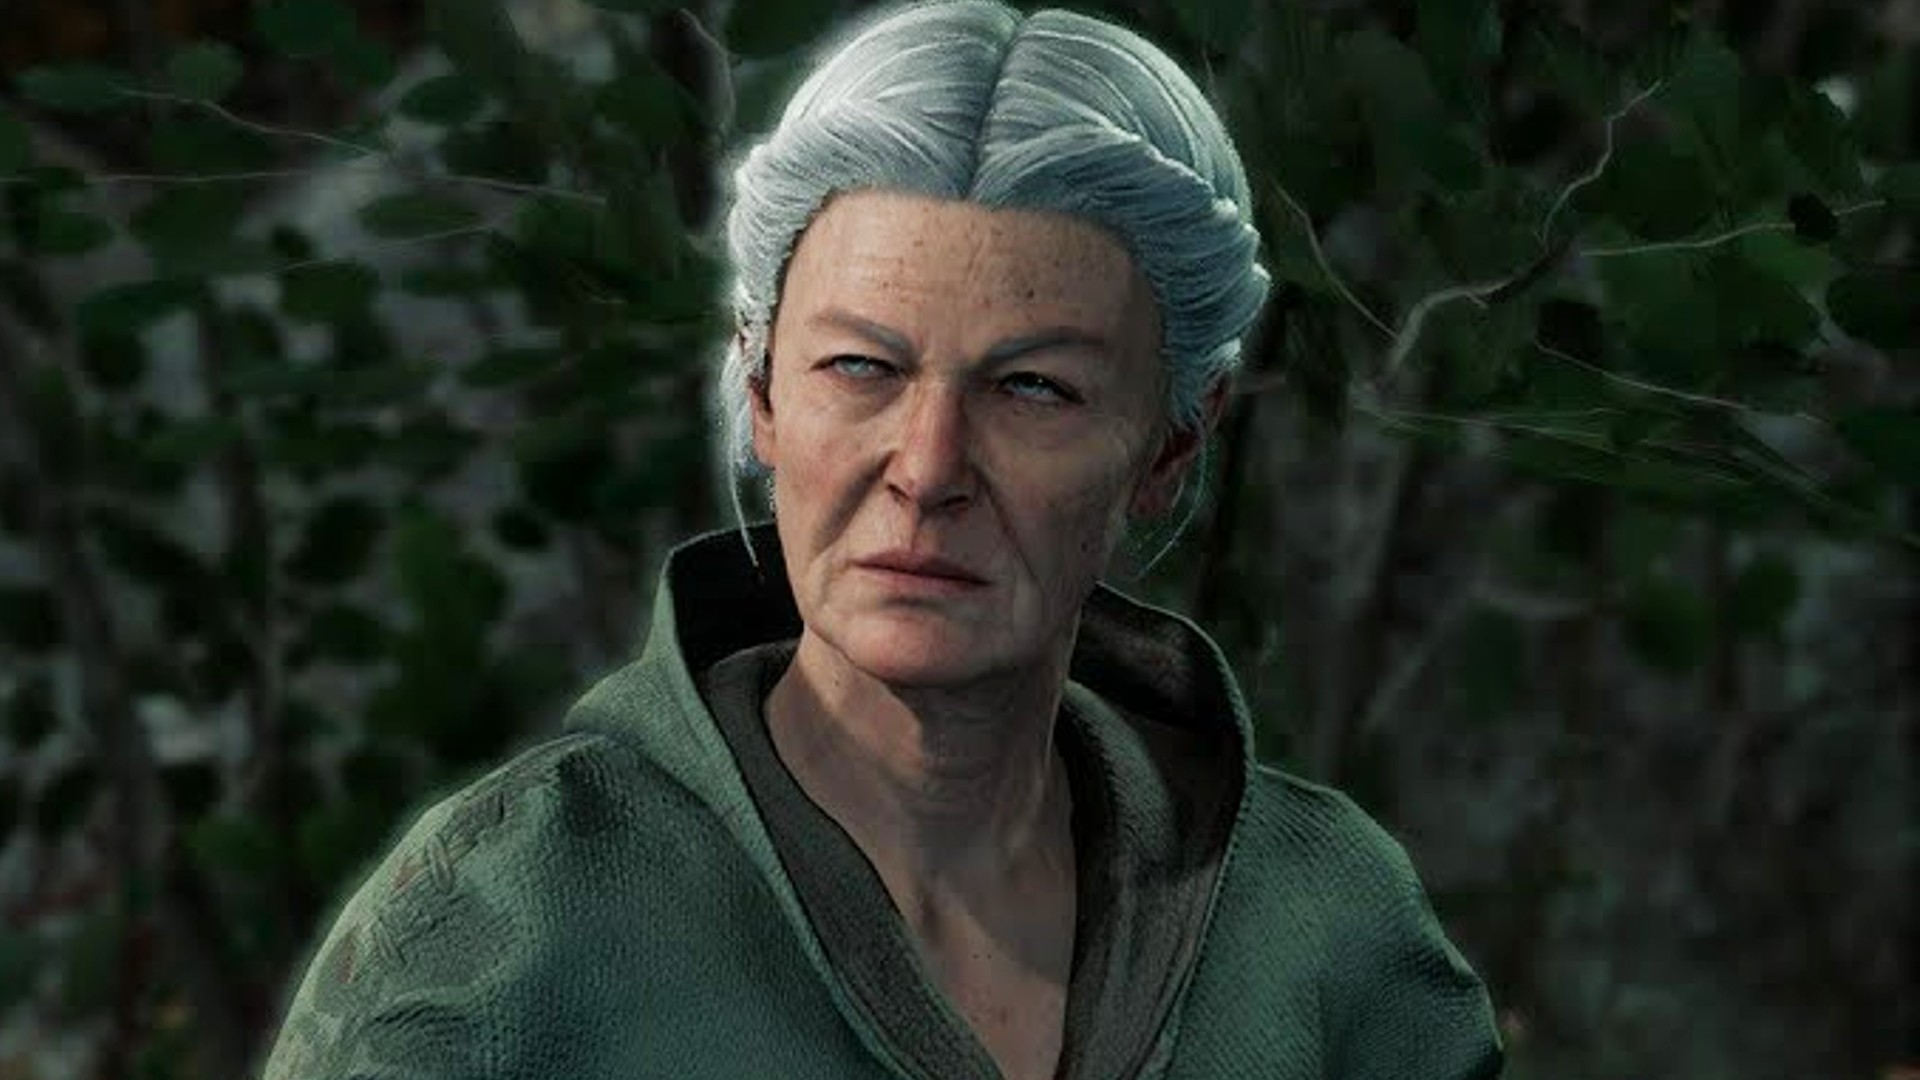 Baldur's Gate 3's Auntie Ethel is inspired by a real grandmother